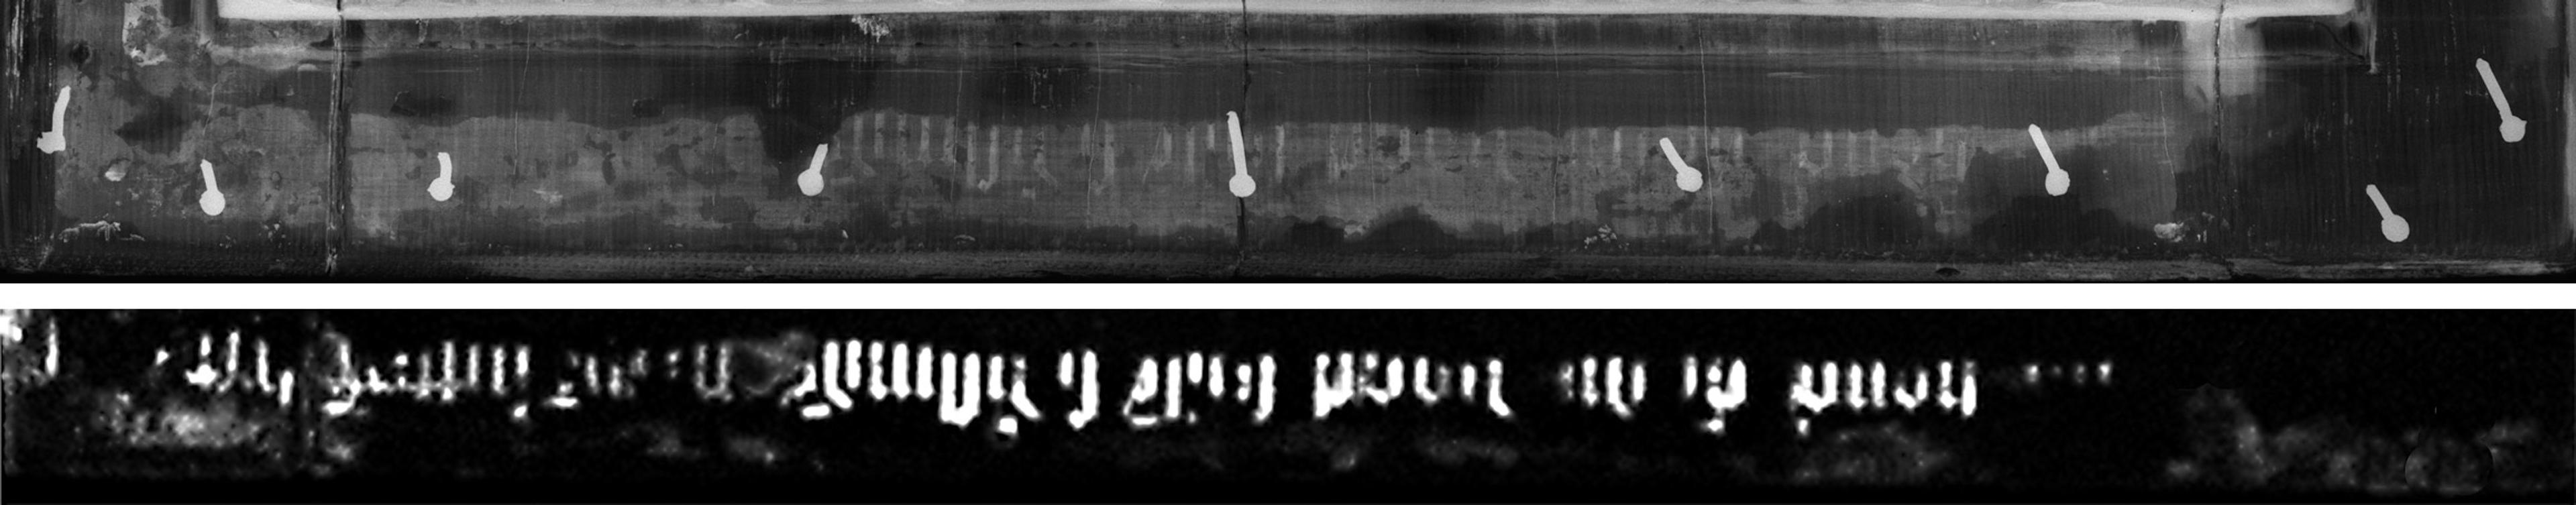 Top: Detail of an X-radiograph image of Jan van Eyck's frame from "The Last Judgment." Bottom: Detail of the lead distribution map acquired by macro-XRF in the "Last Judgment" frame 